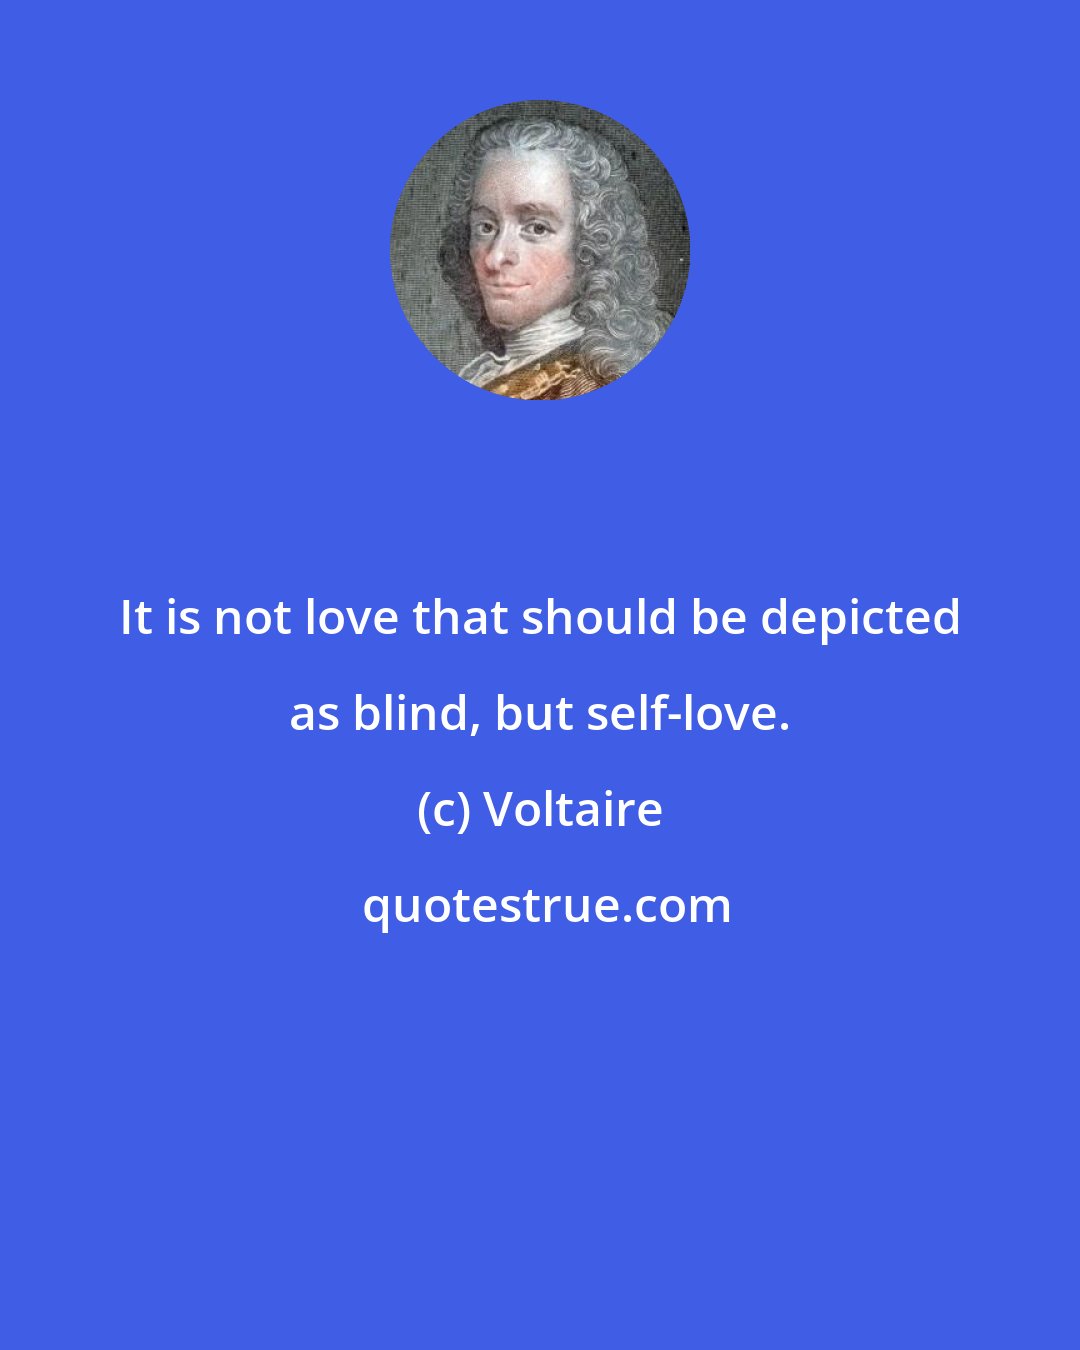 Voltaire: It is not love that should be depicted as blind, but self-love.